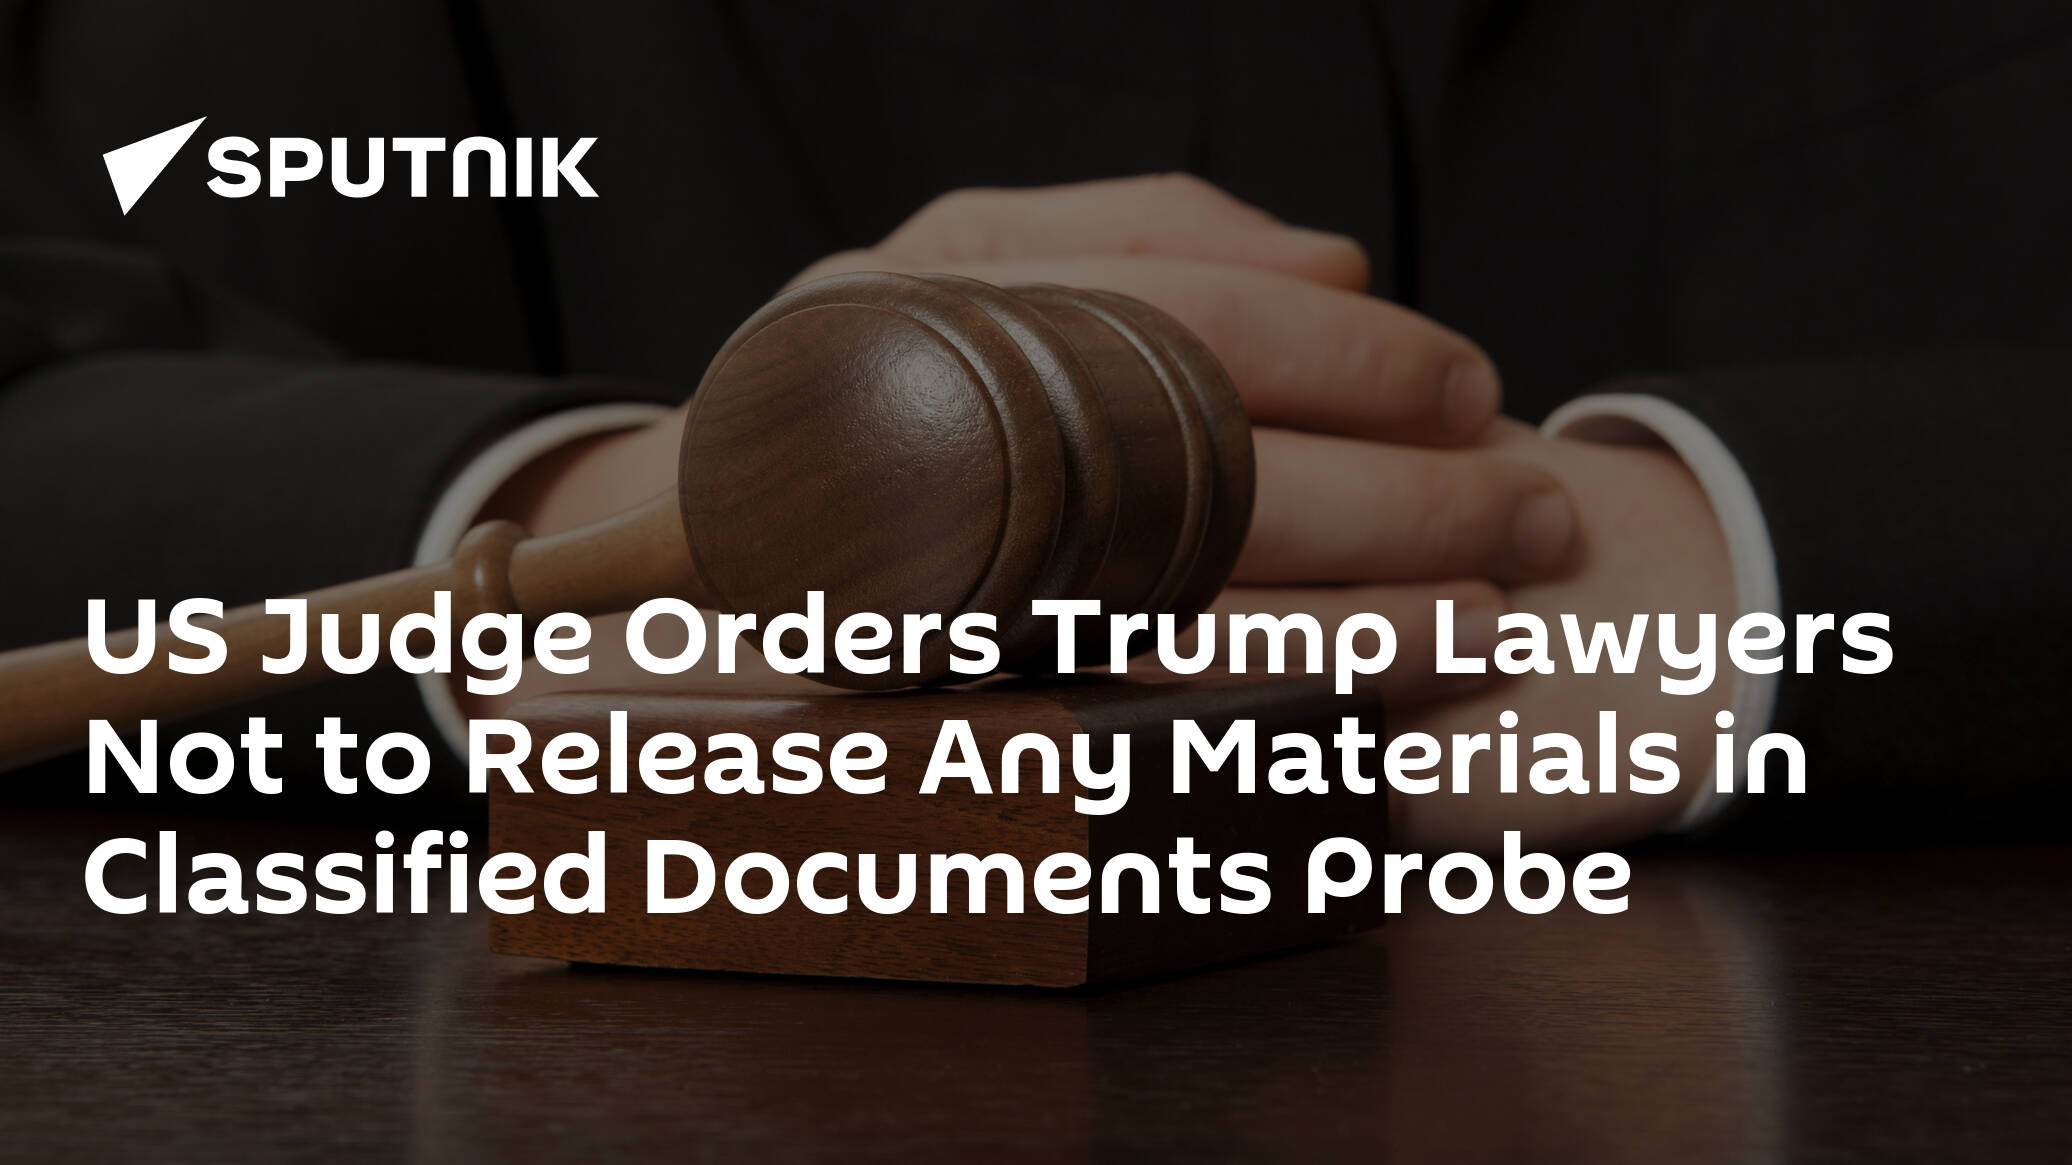 US Judge Orders Trump Lawyers Not to Release Any Materials in Classified Documents Probe